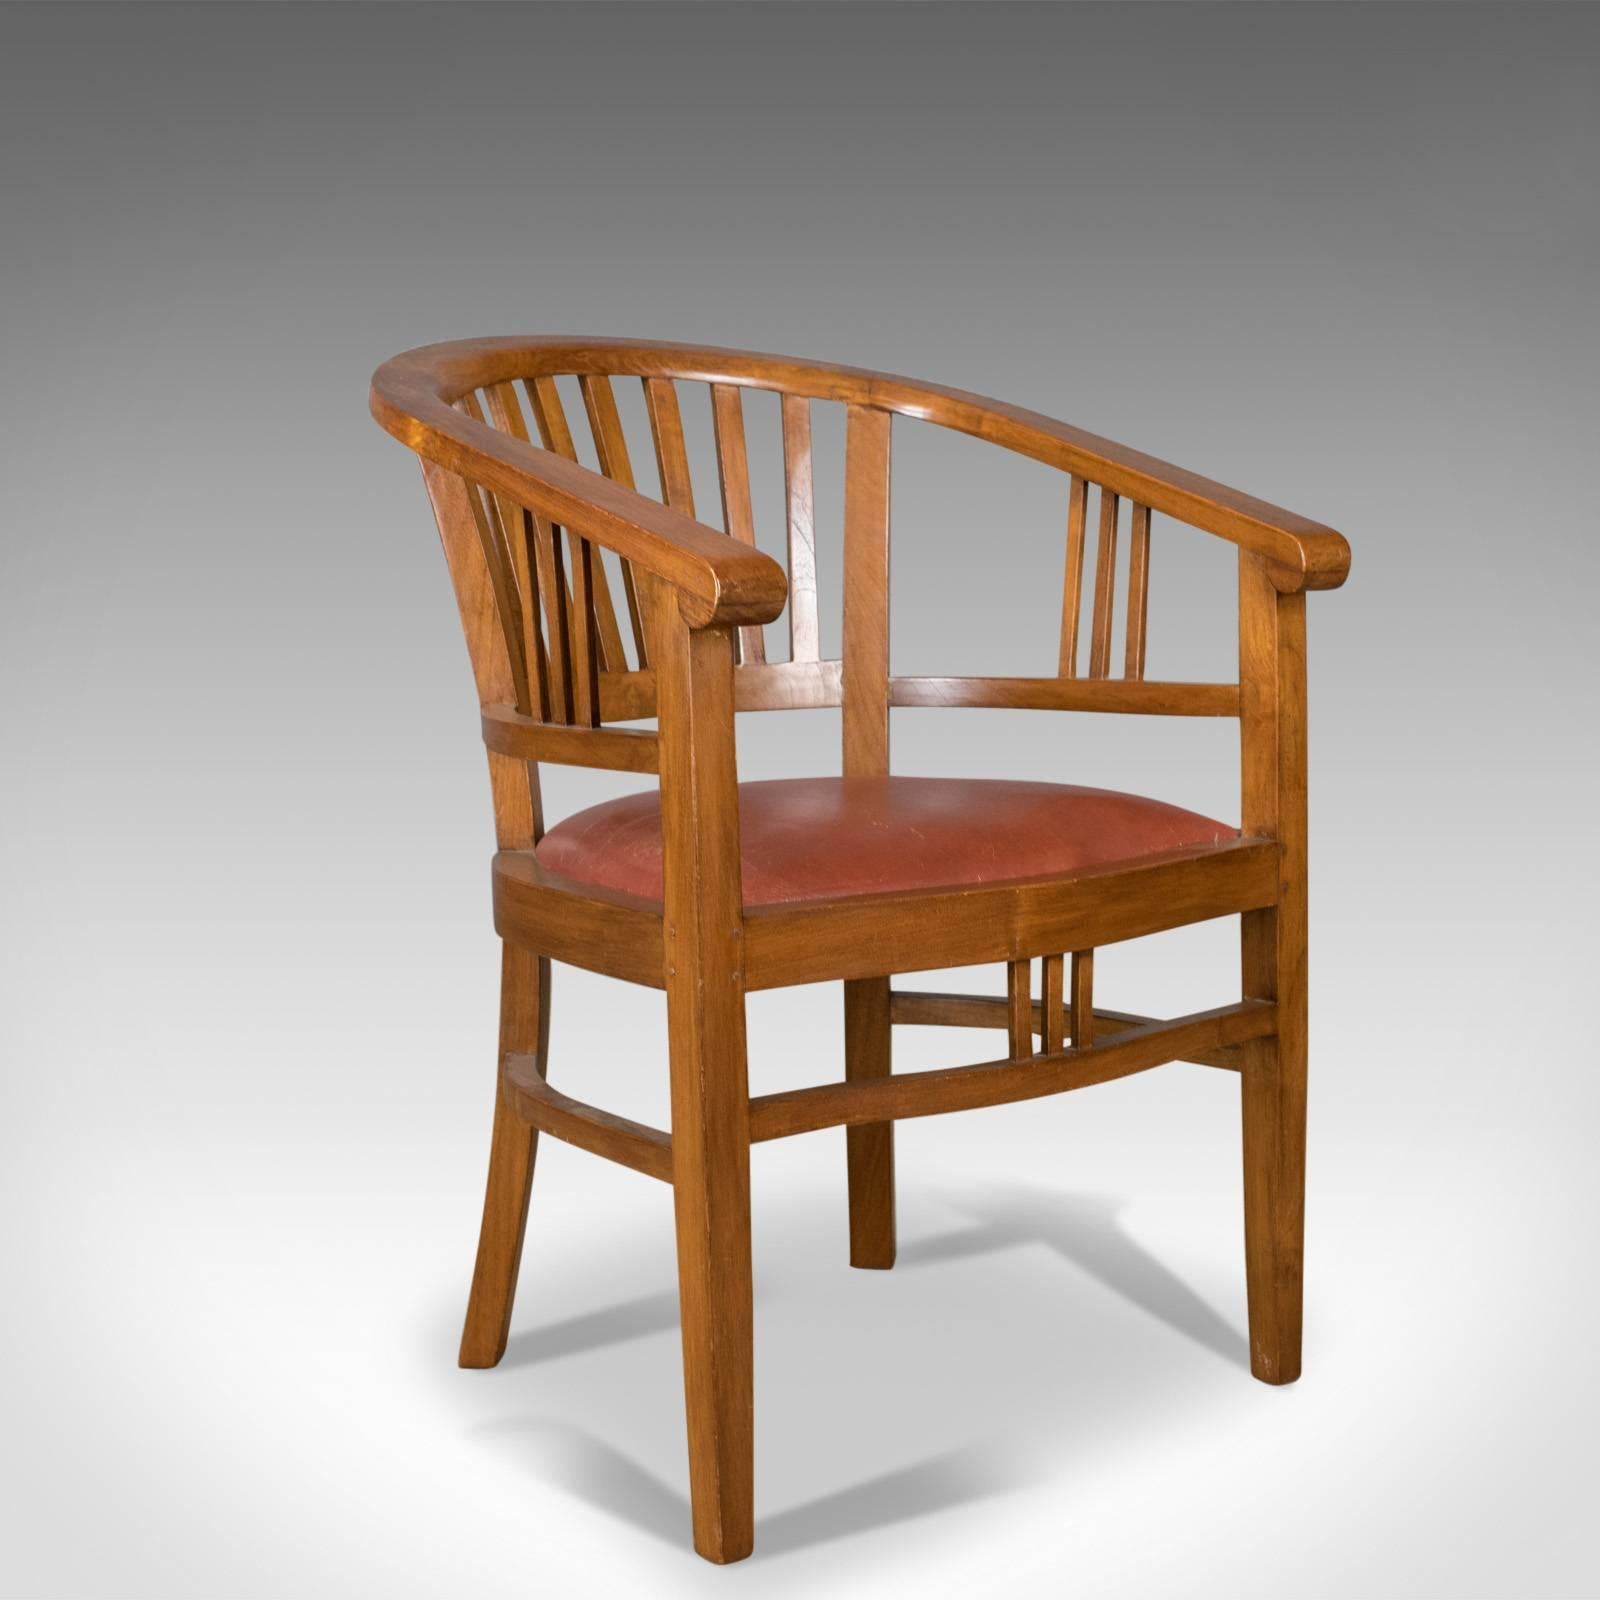 This is a pair of elbow chairs, 20th century, contemporary tub dining chairs, English armchairs.

Solid beech frames in good order throughout
The chairs display well in rich, caramel tones
Of quality craftsmanship, solidly constructed
Drop in